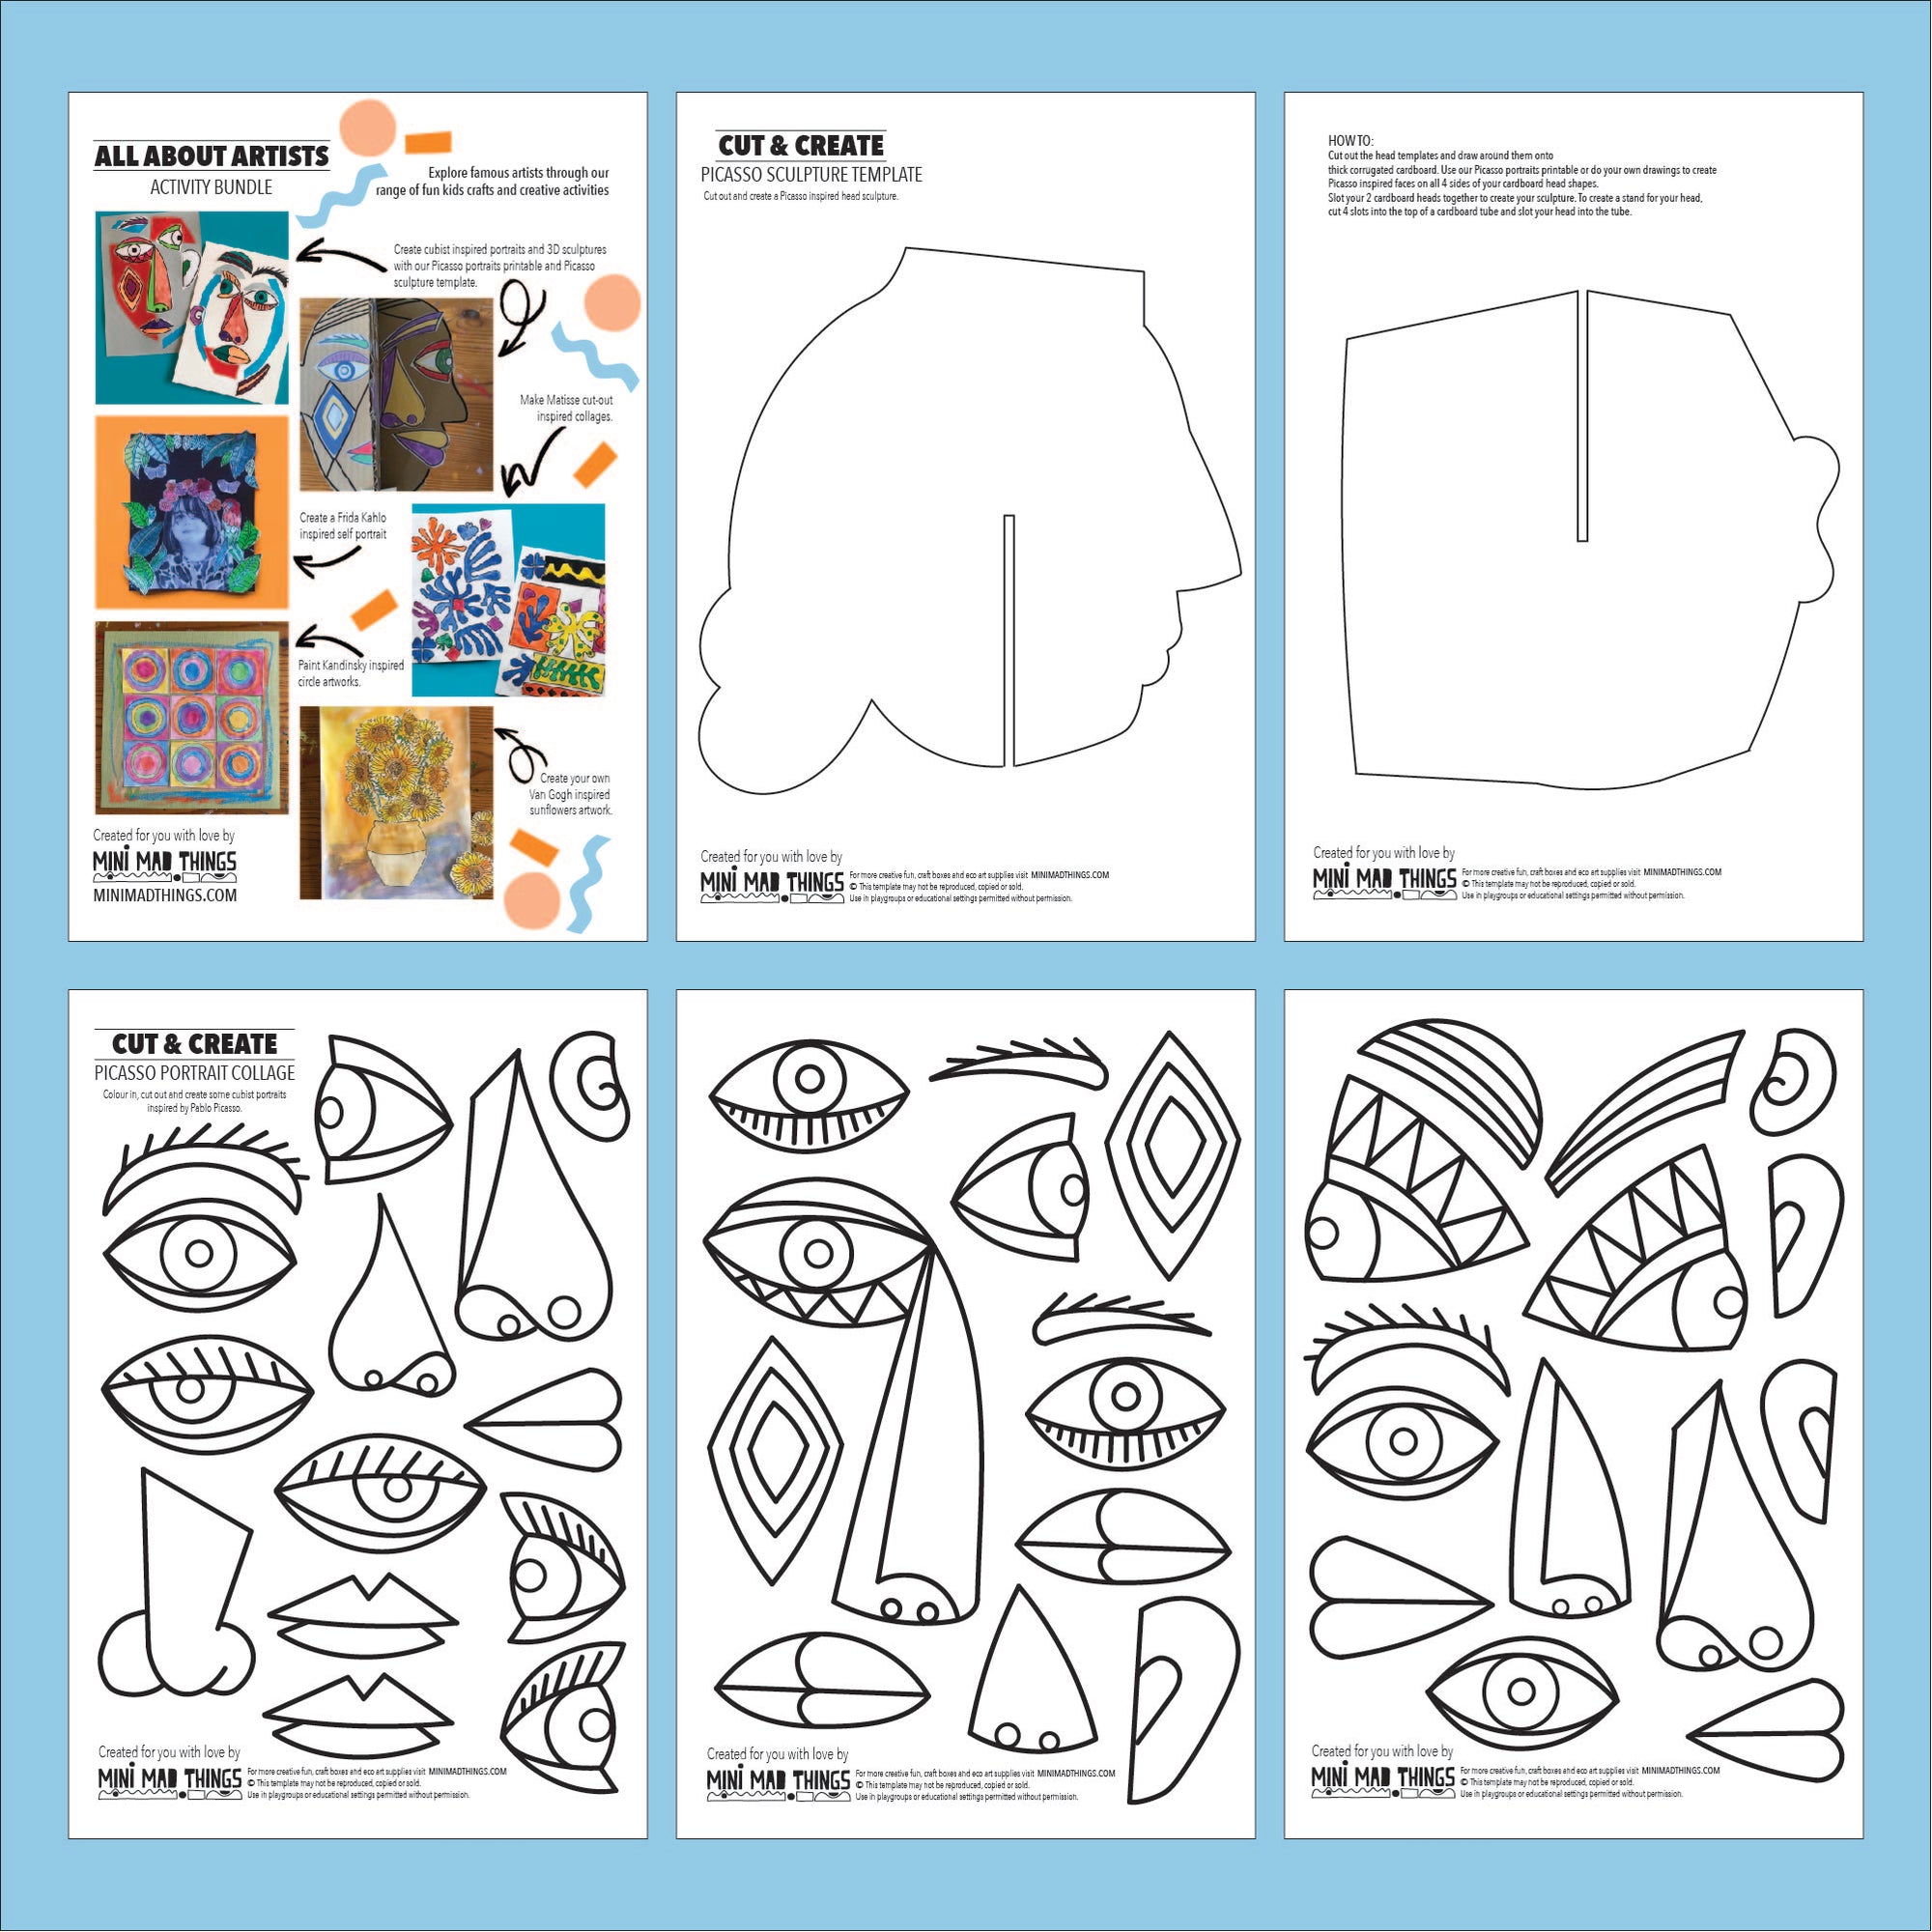 All About Artists - Printable activity bundle